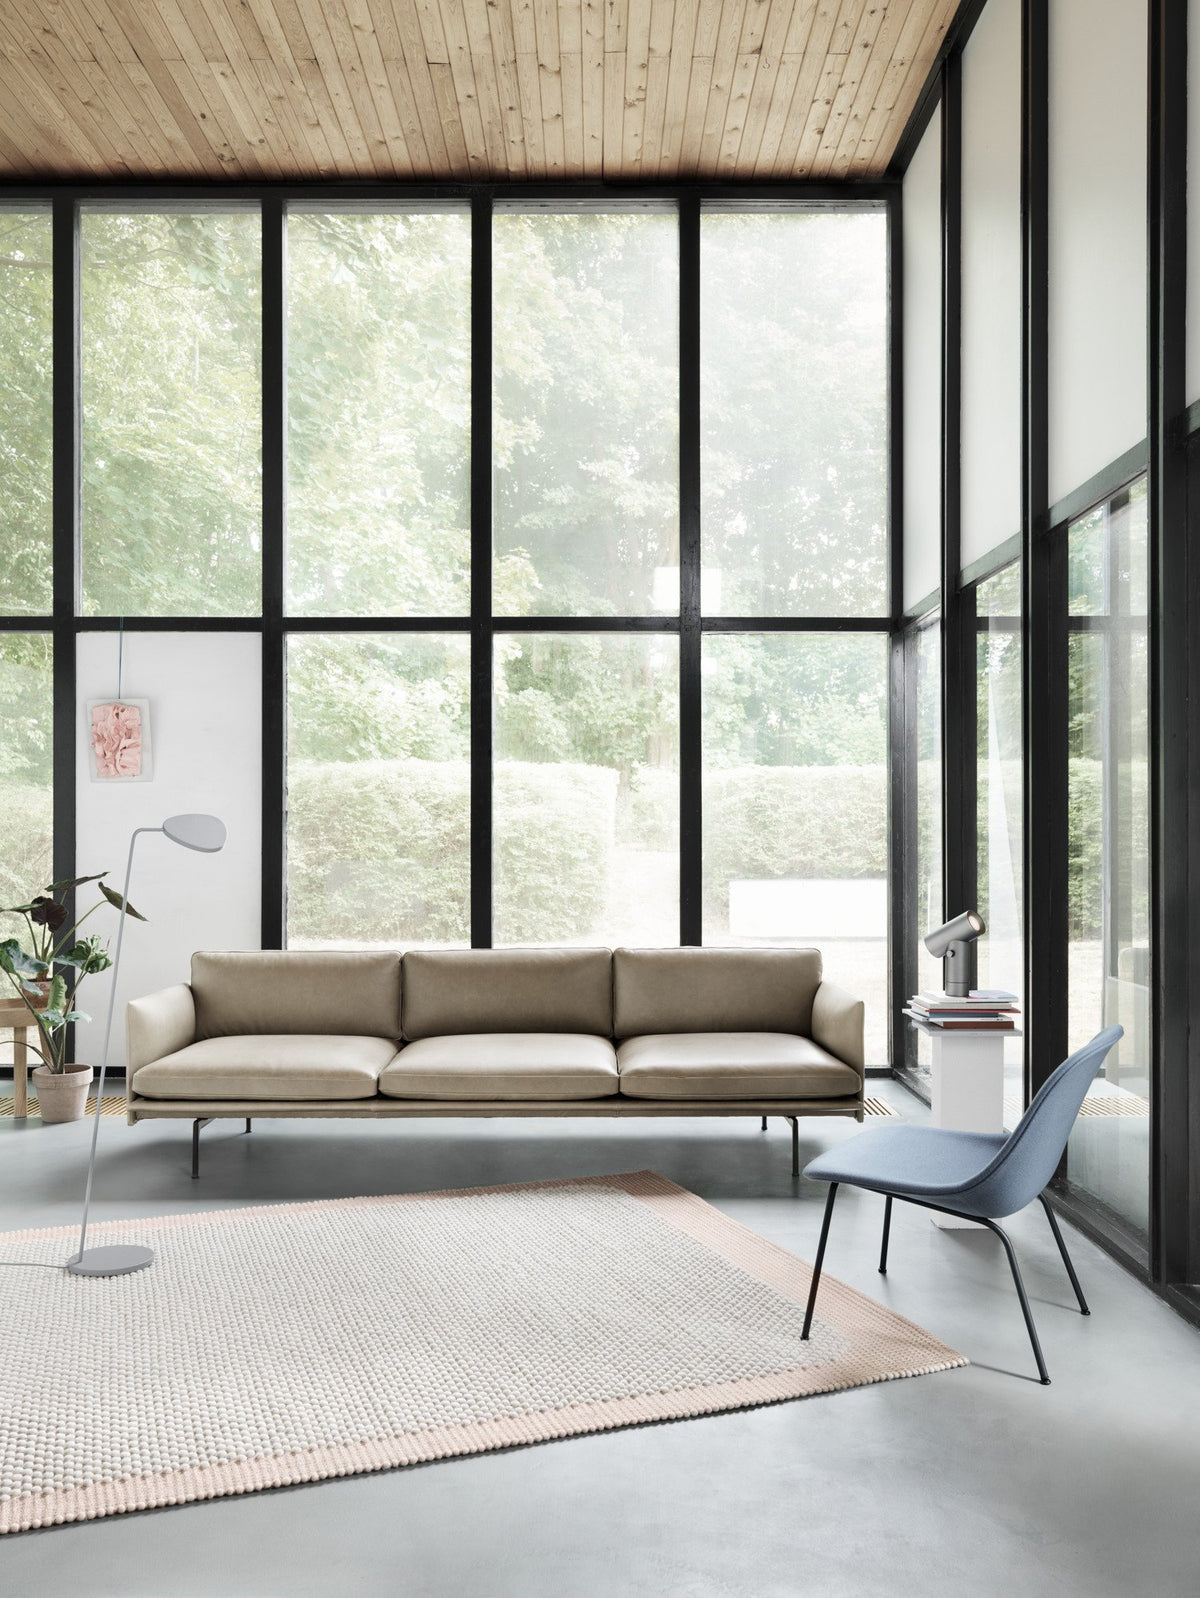 Outline Sofa - 3 1/2 Seater by Muuto